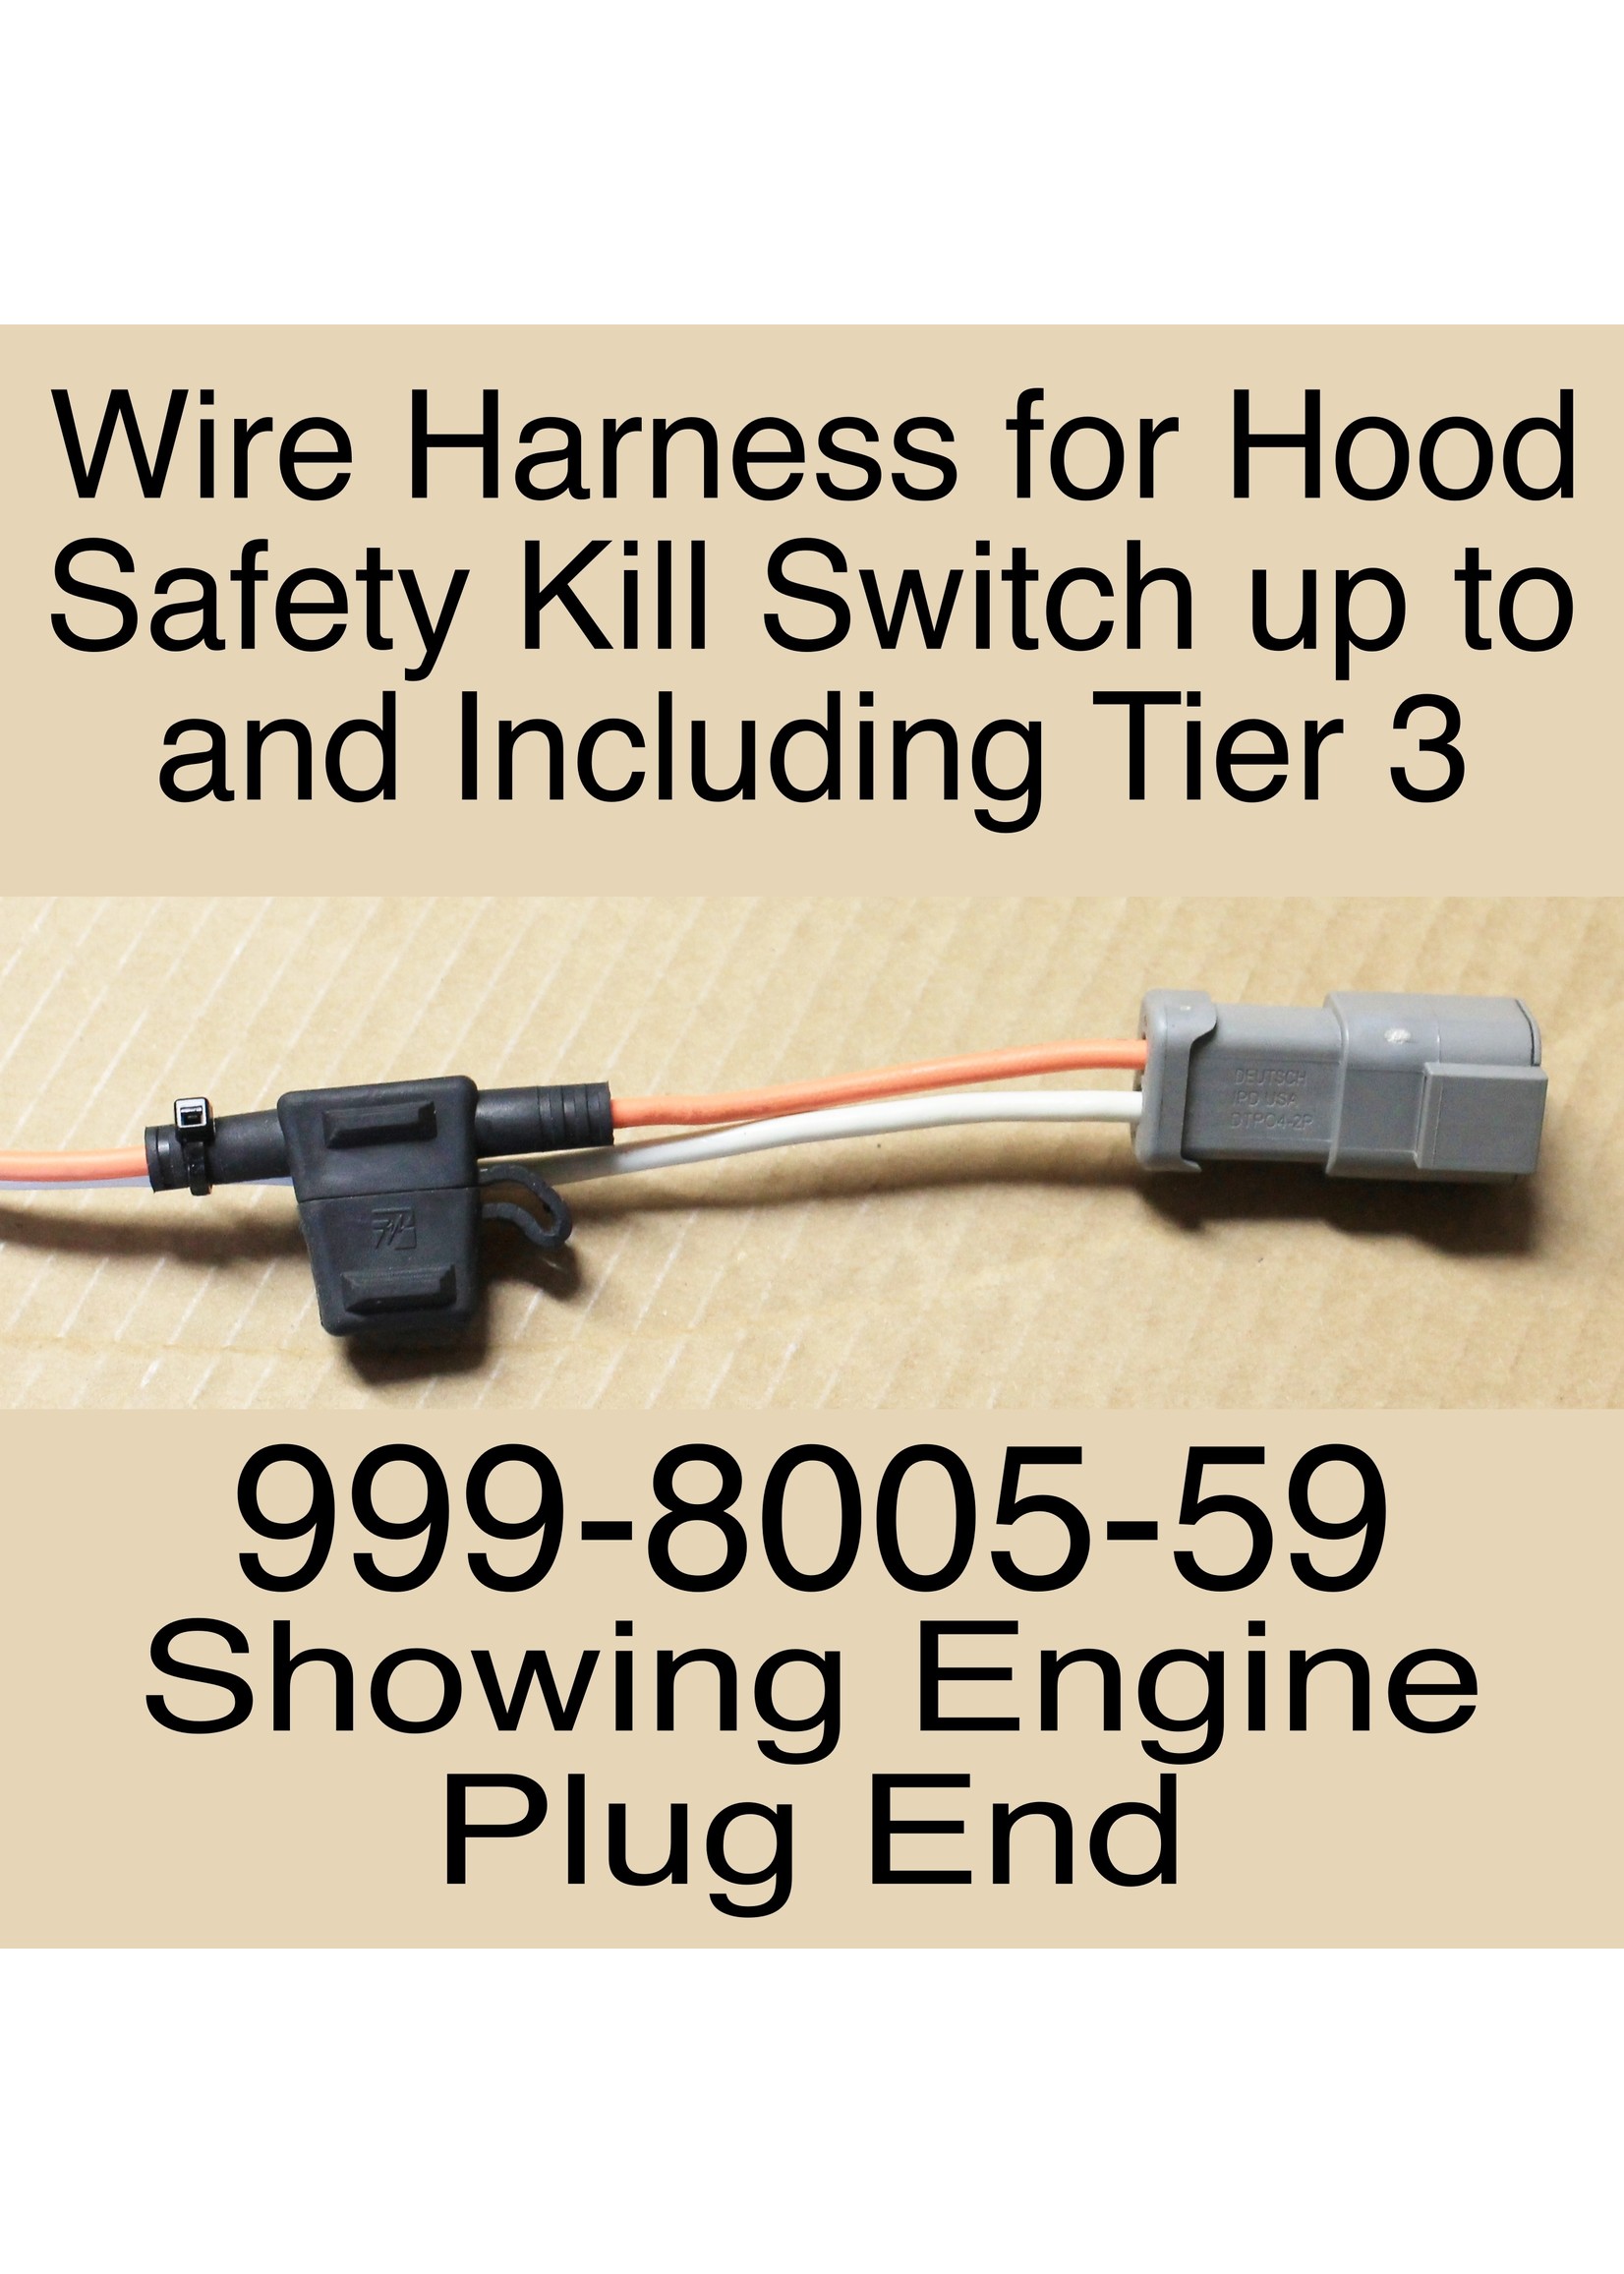 Bandit® Parts Pollack Kill Switch 12.5 - Wire Harness For Hood Safety Kill Switch Up To And Including Tier 3 was 999-8002-43